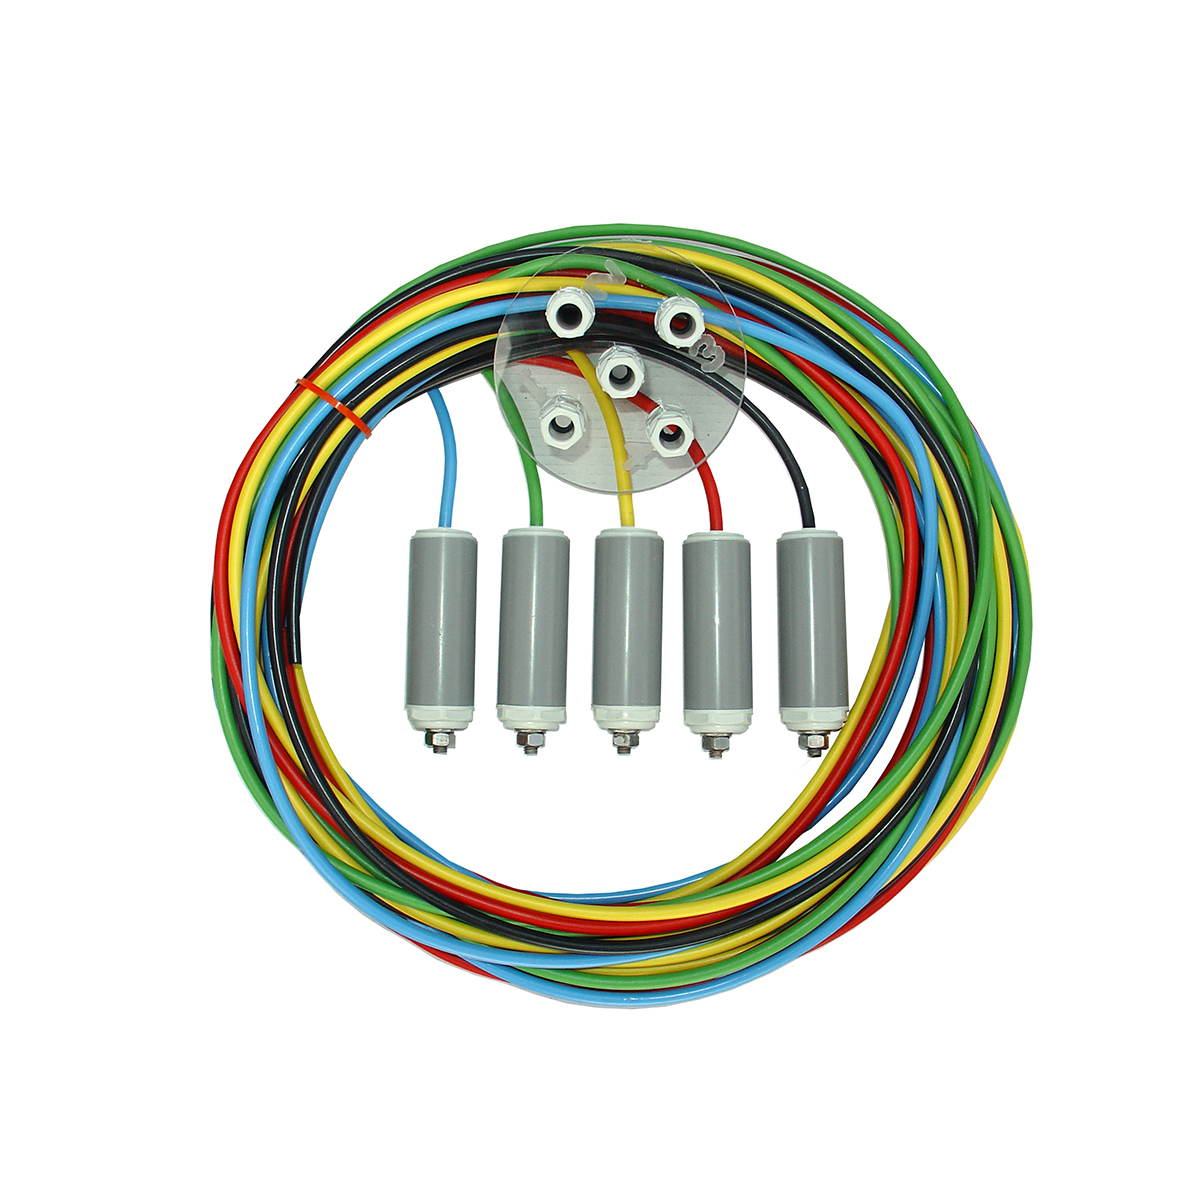 Sensor set for iQntrol-N2 with 5 V4A sensors 5m each and special cable (colored, ozone resistant) Sensor set for iQntrol-N2 with 5 V4A sensors 5m each and special cable (colored, ozone resistant)